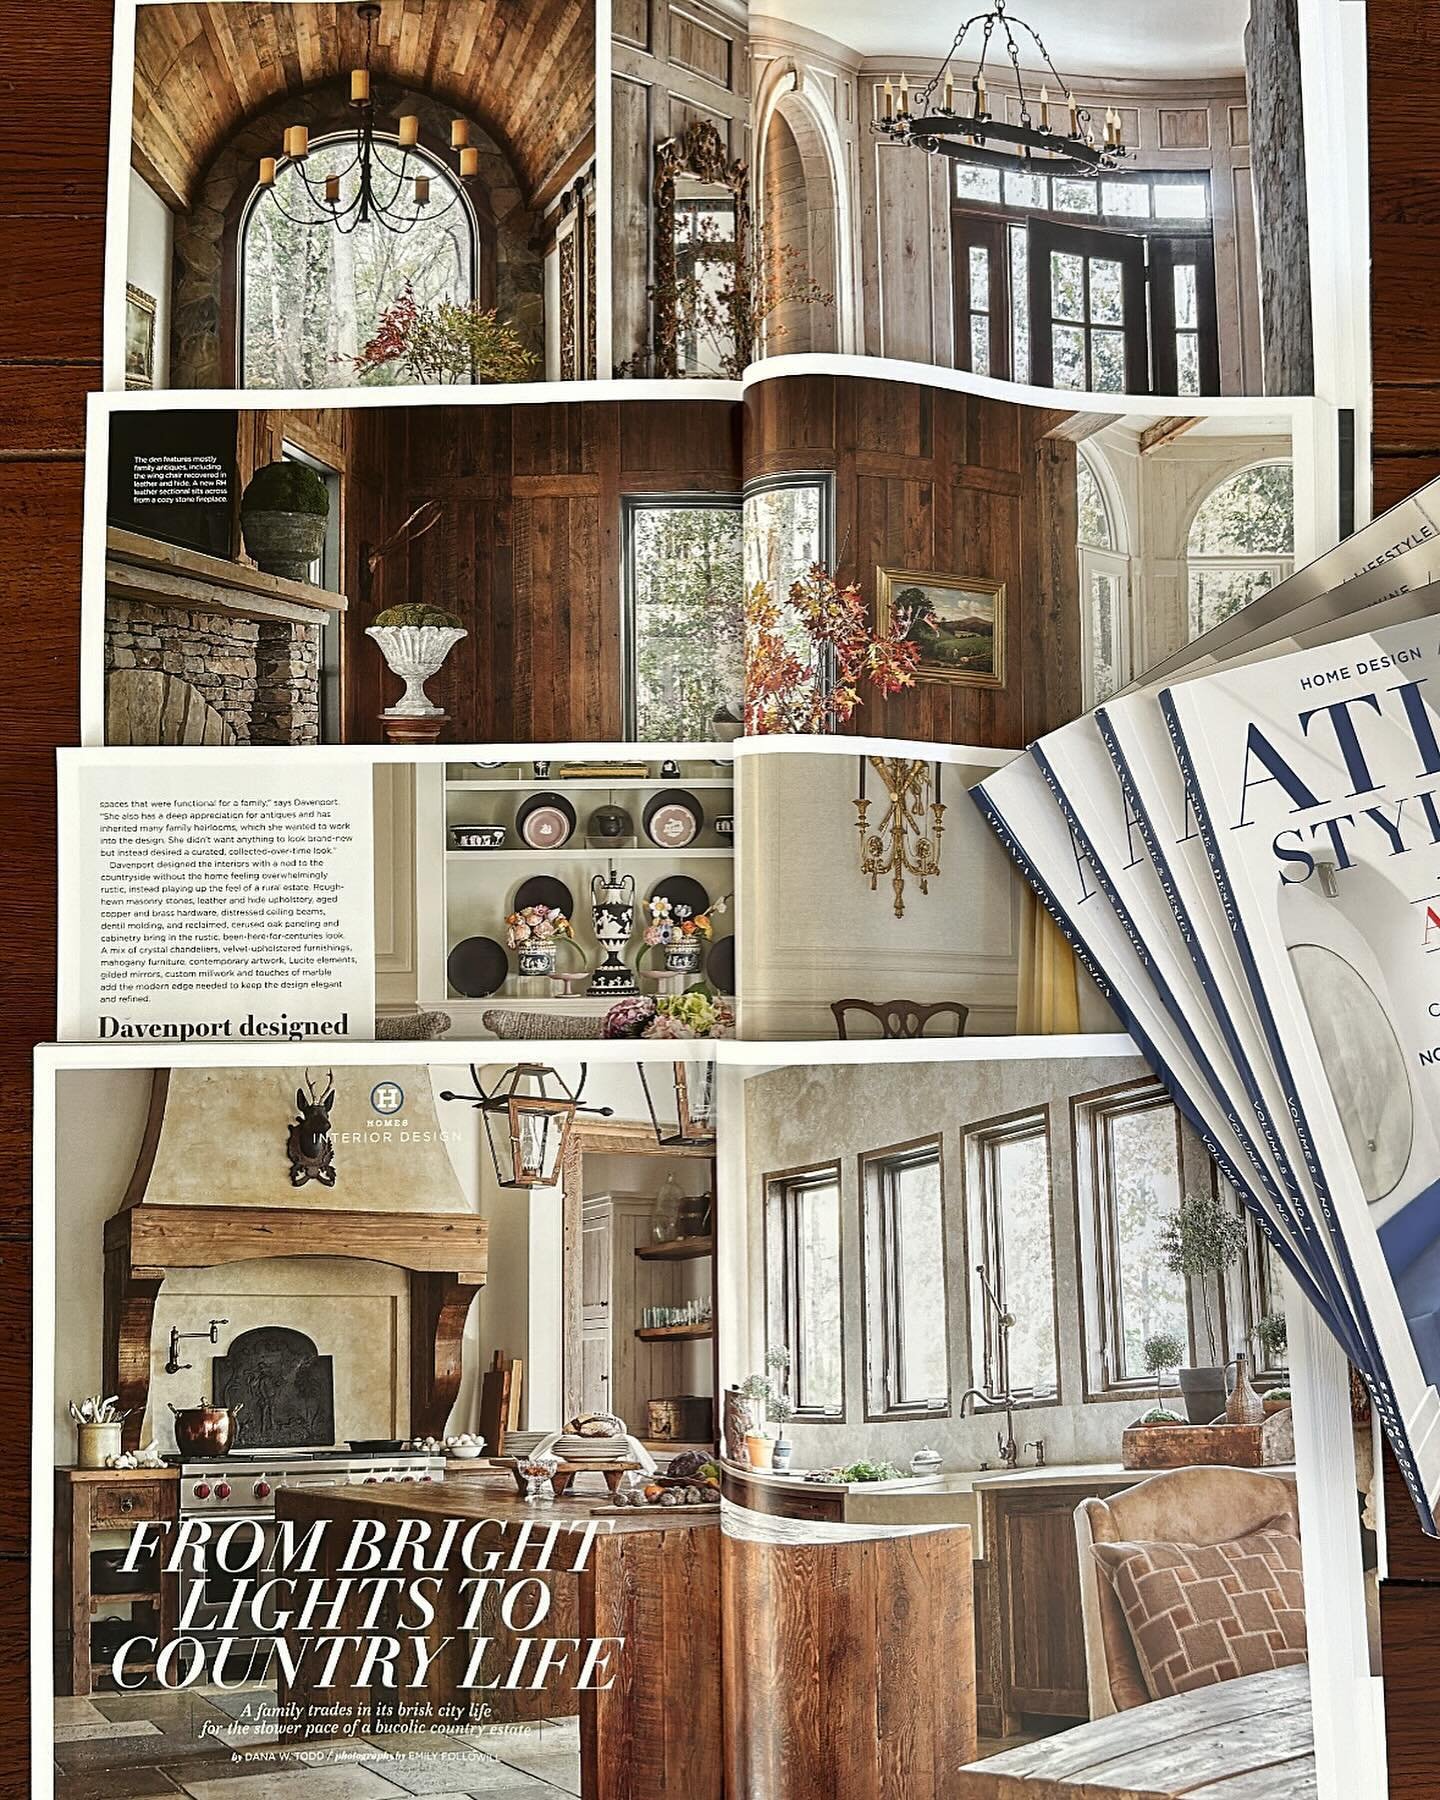 Have you all grabbed the FIRST issue of @atlstyleanddesign magazine yet? 📖

One of our favorite projects is featured! #projectriversedge 

📷: @emilyfollowillphotographer 
📖: @atlstyleanddesign